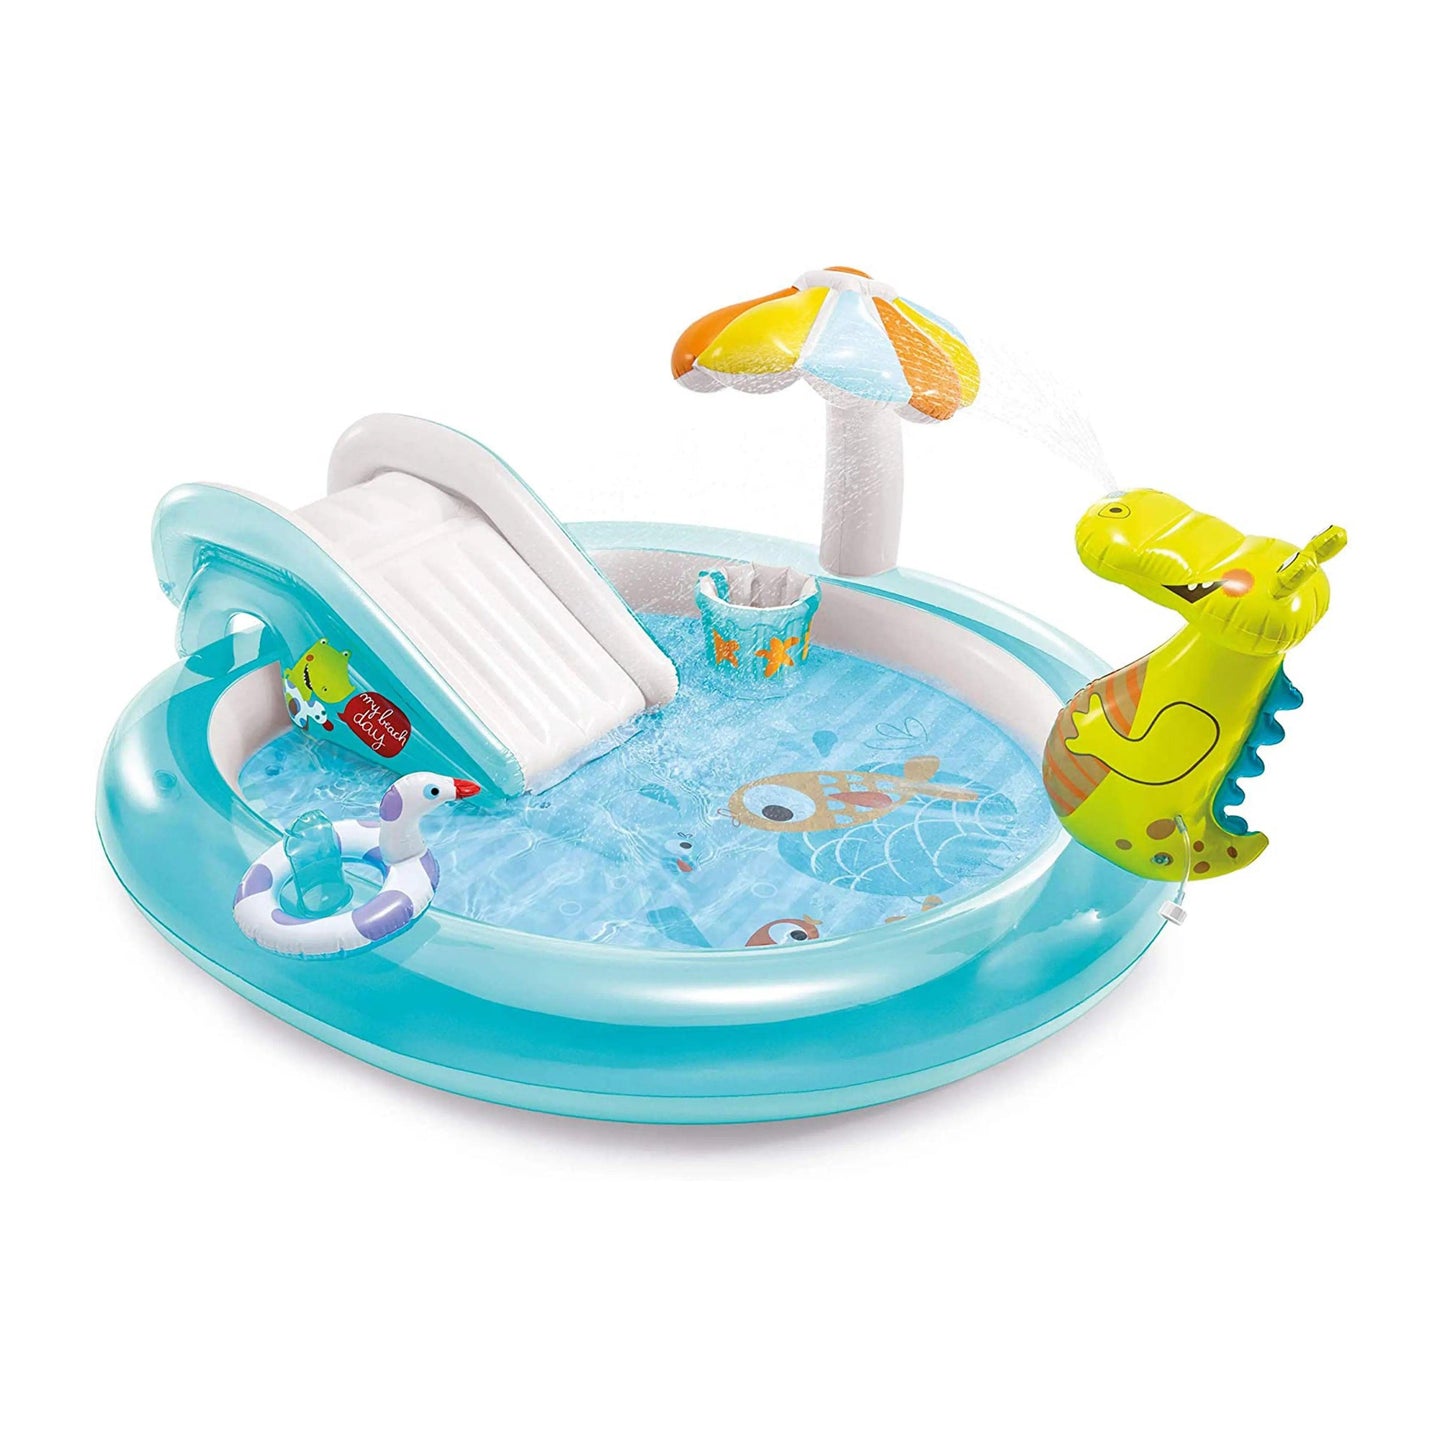 INTEX Gator Play Center 57165 The Stationers